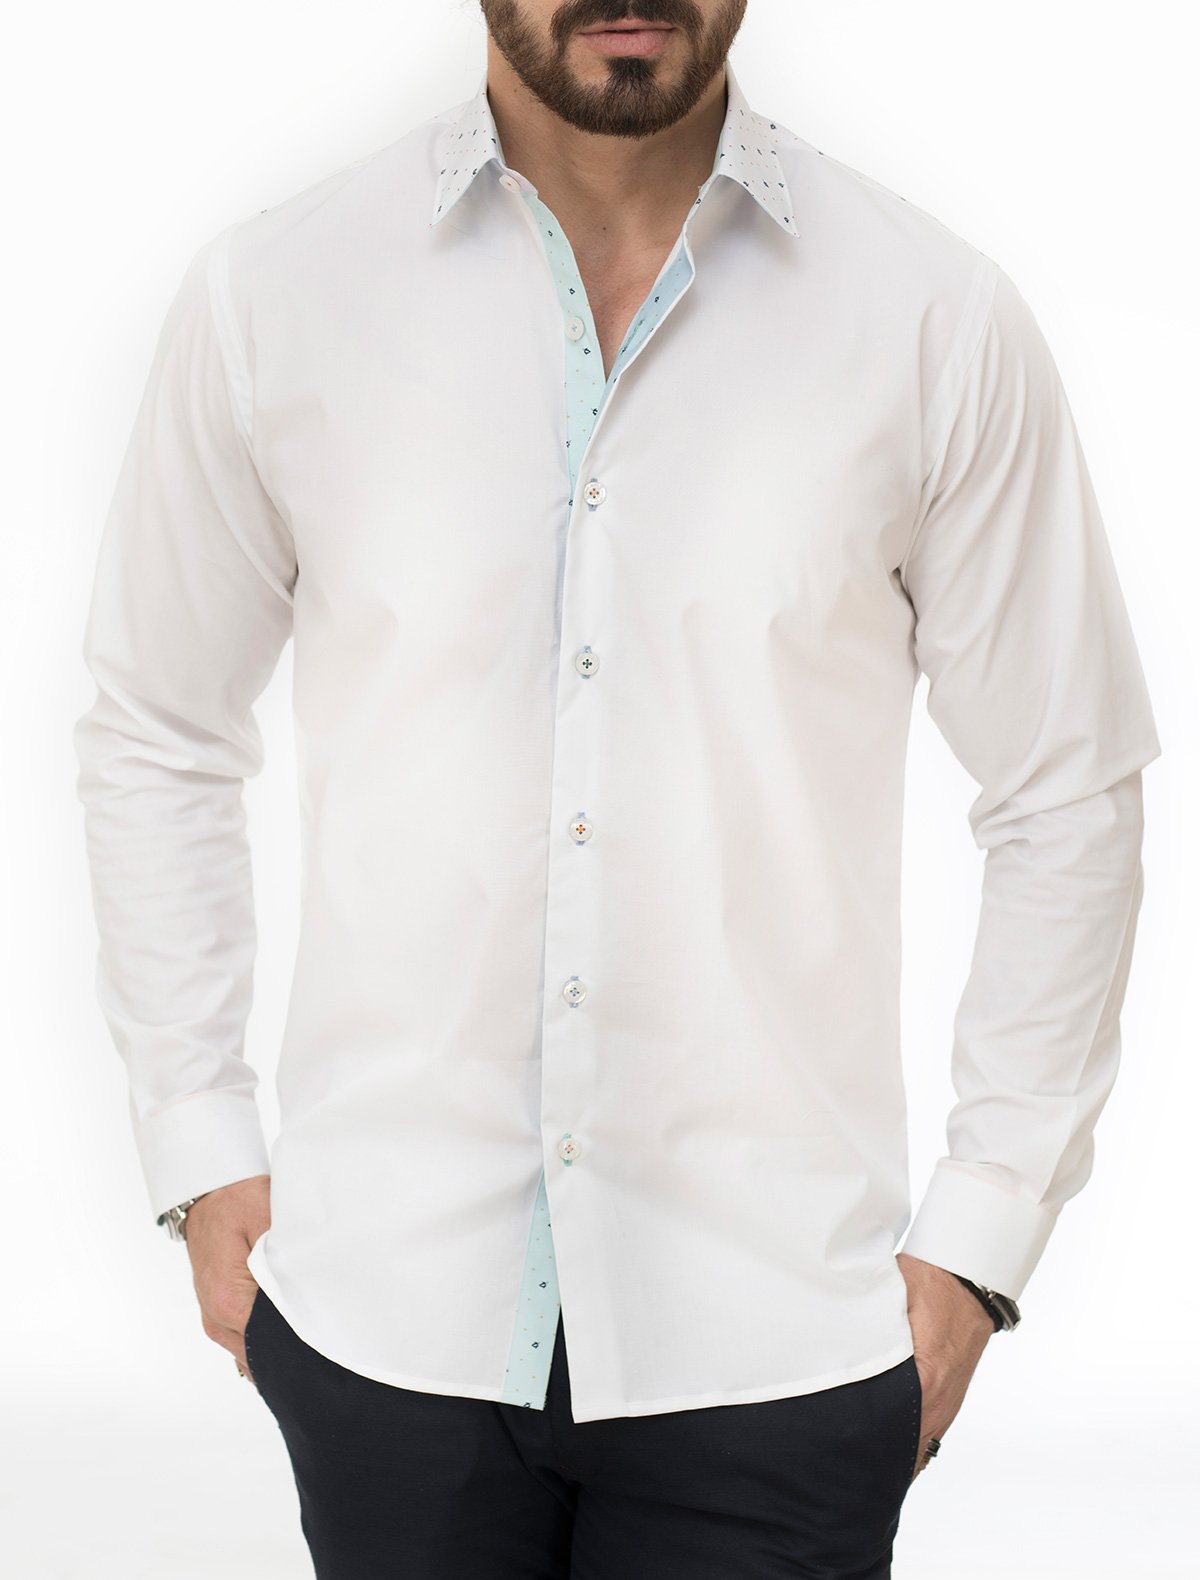 WHITE SHIRT WITH PRINTED COLLAR